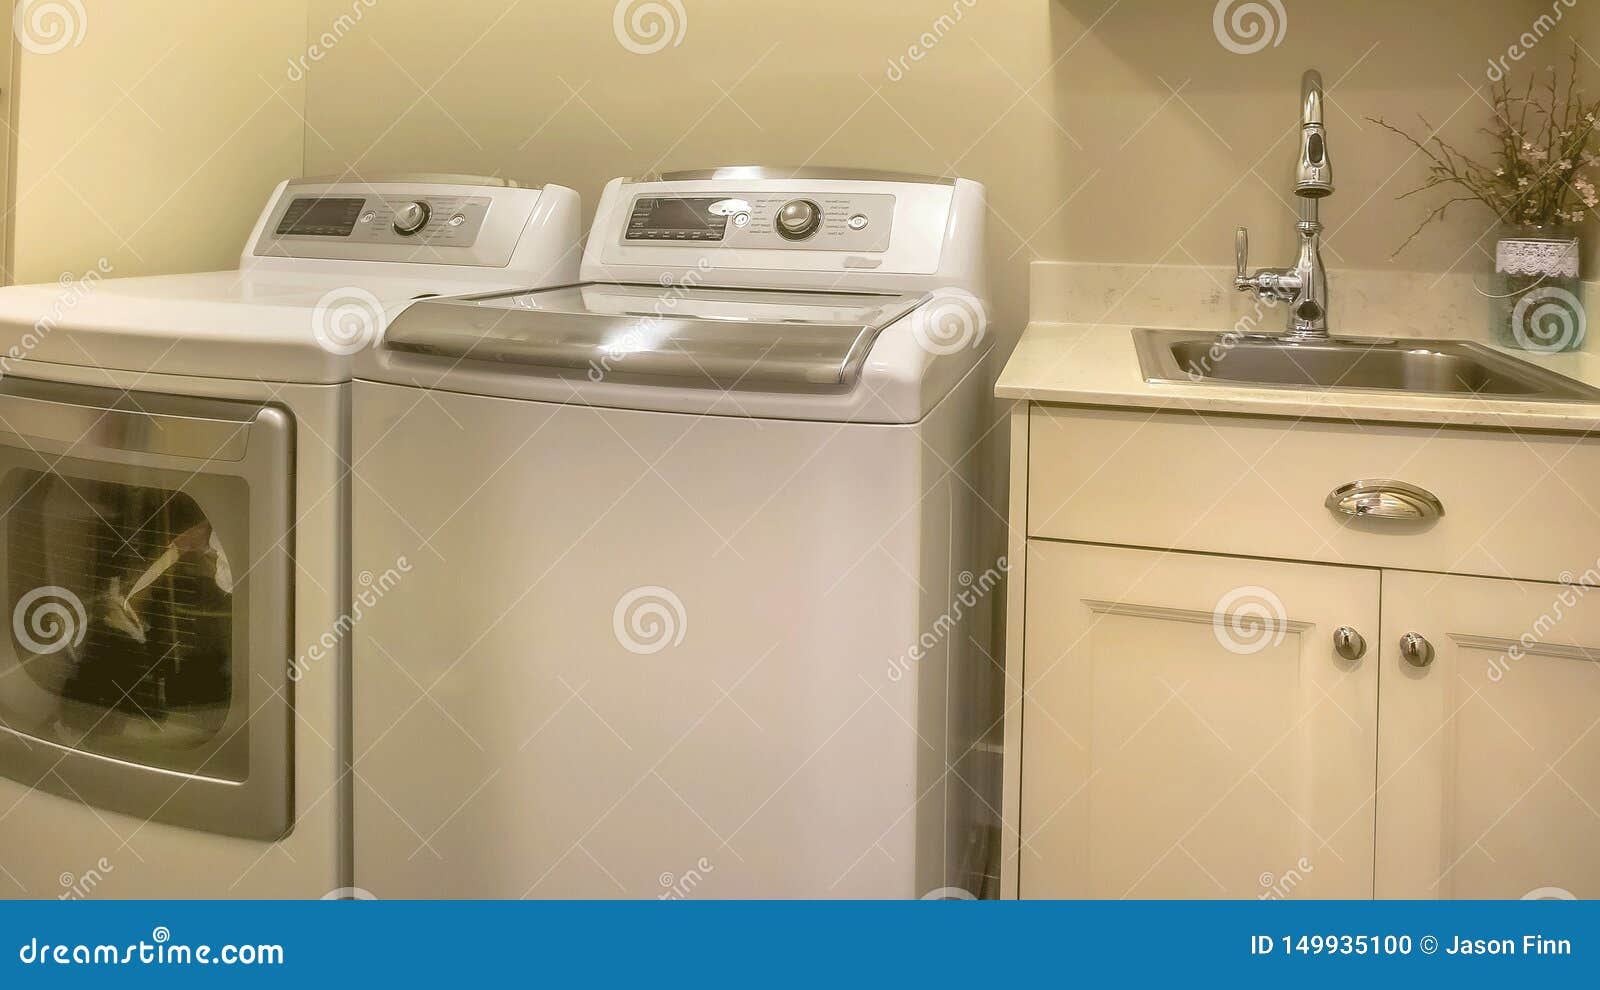 Panorama Frame Washing Machine And Dryer Inside The Laundry Room